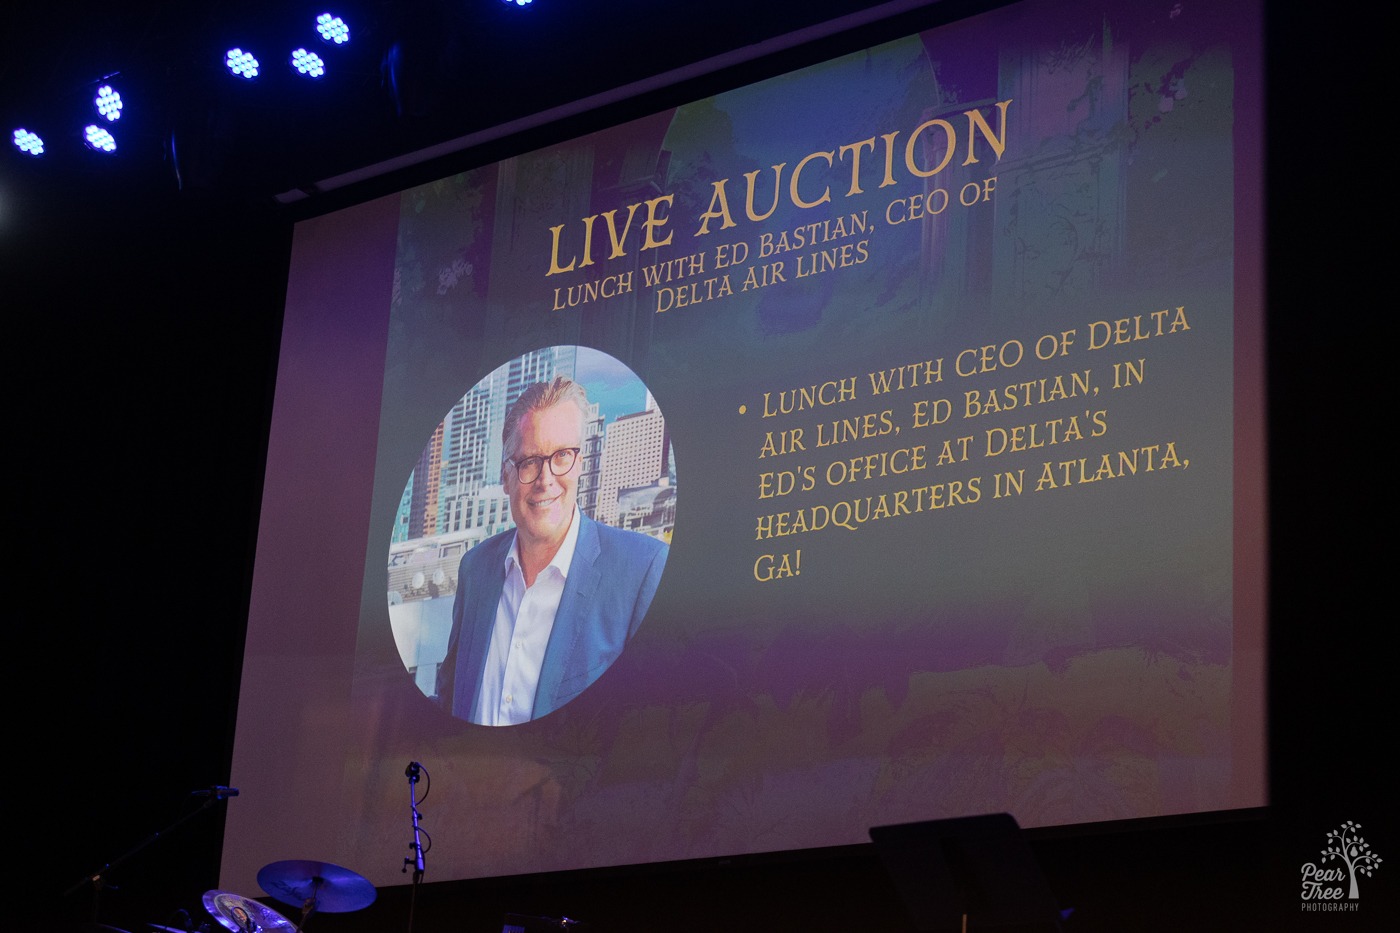 Live auction of a lunch with Delta CEO Ed Bastian to raise money for Covenant House Georgia